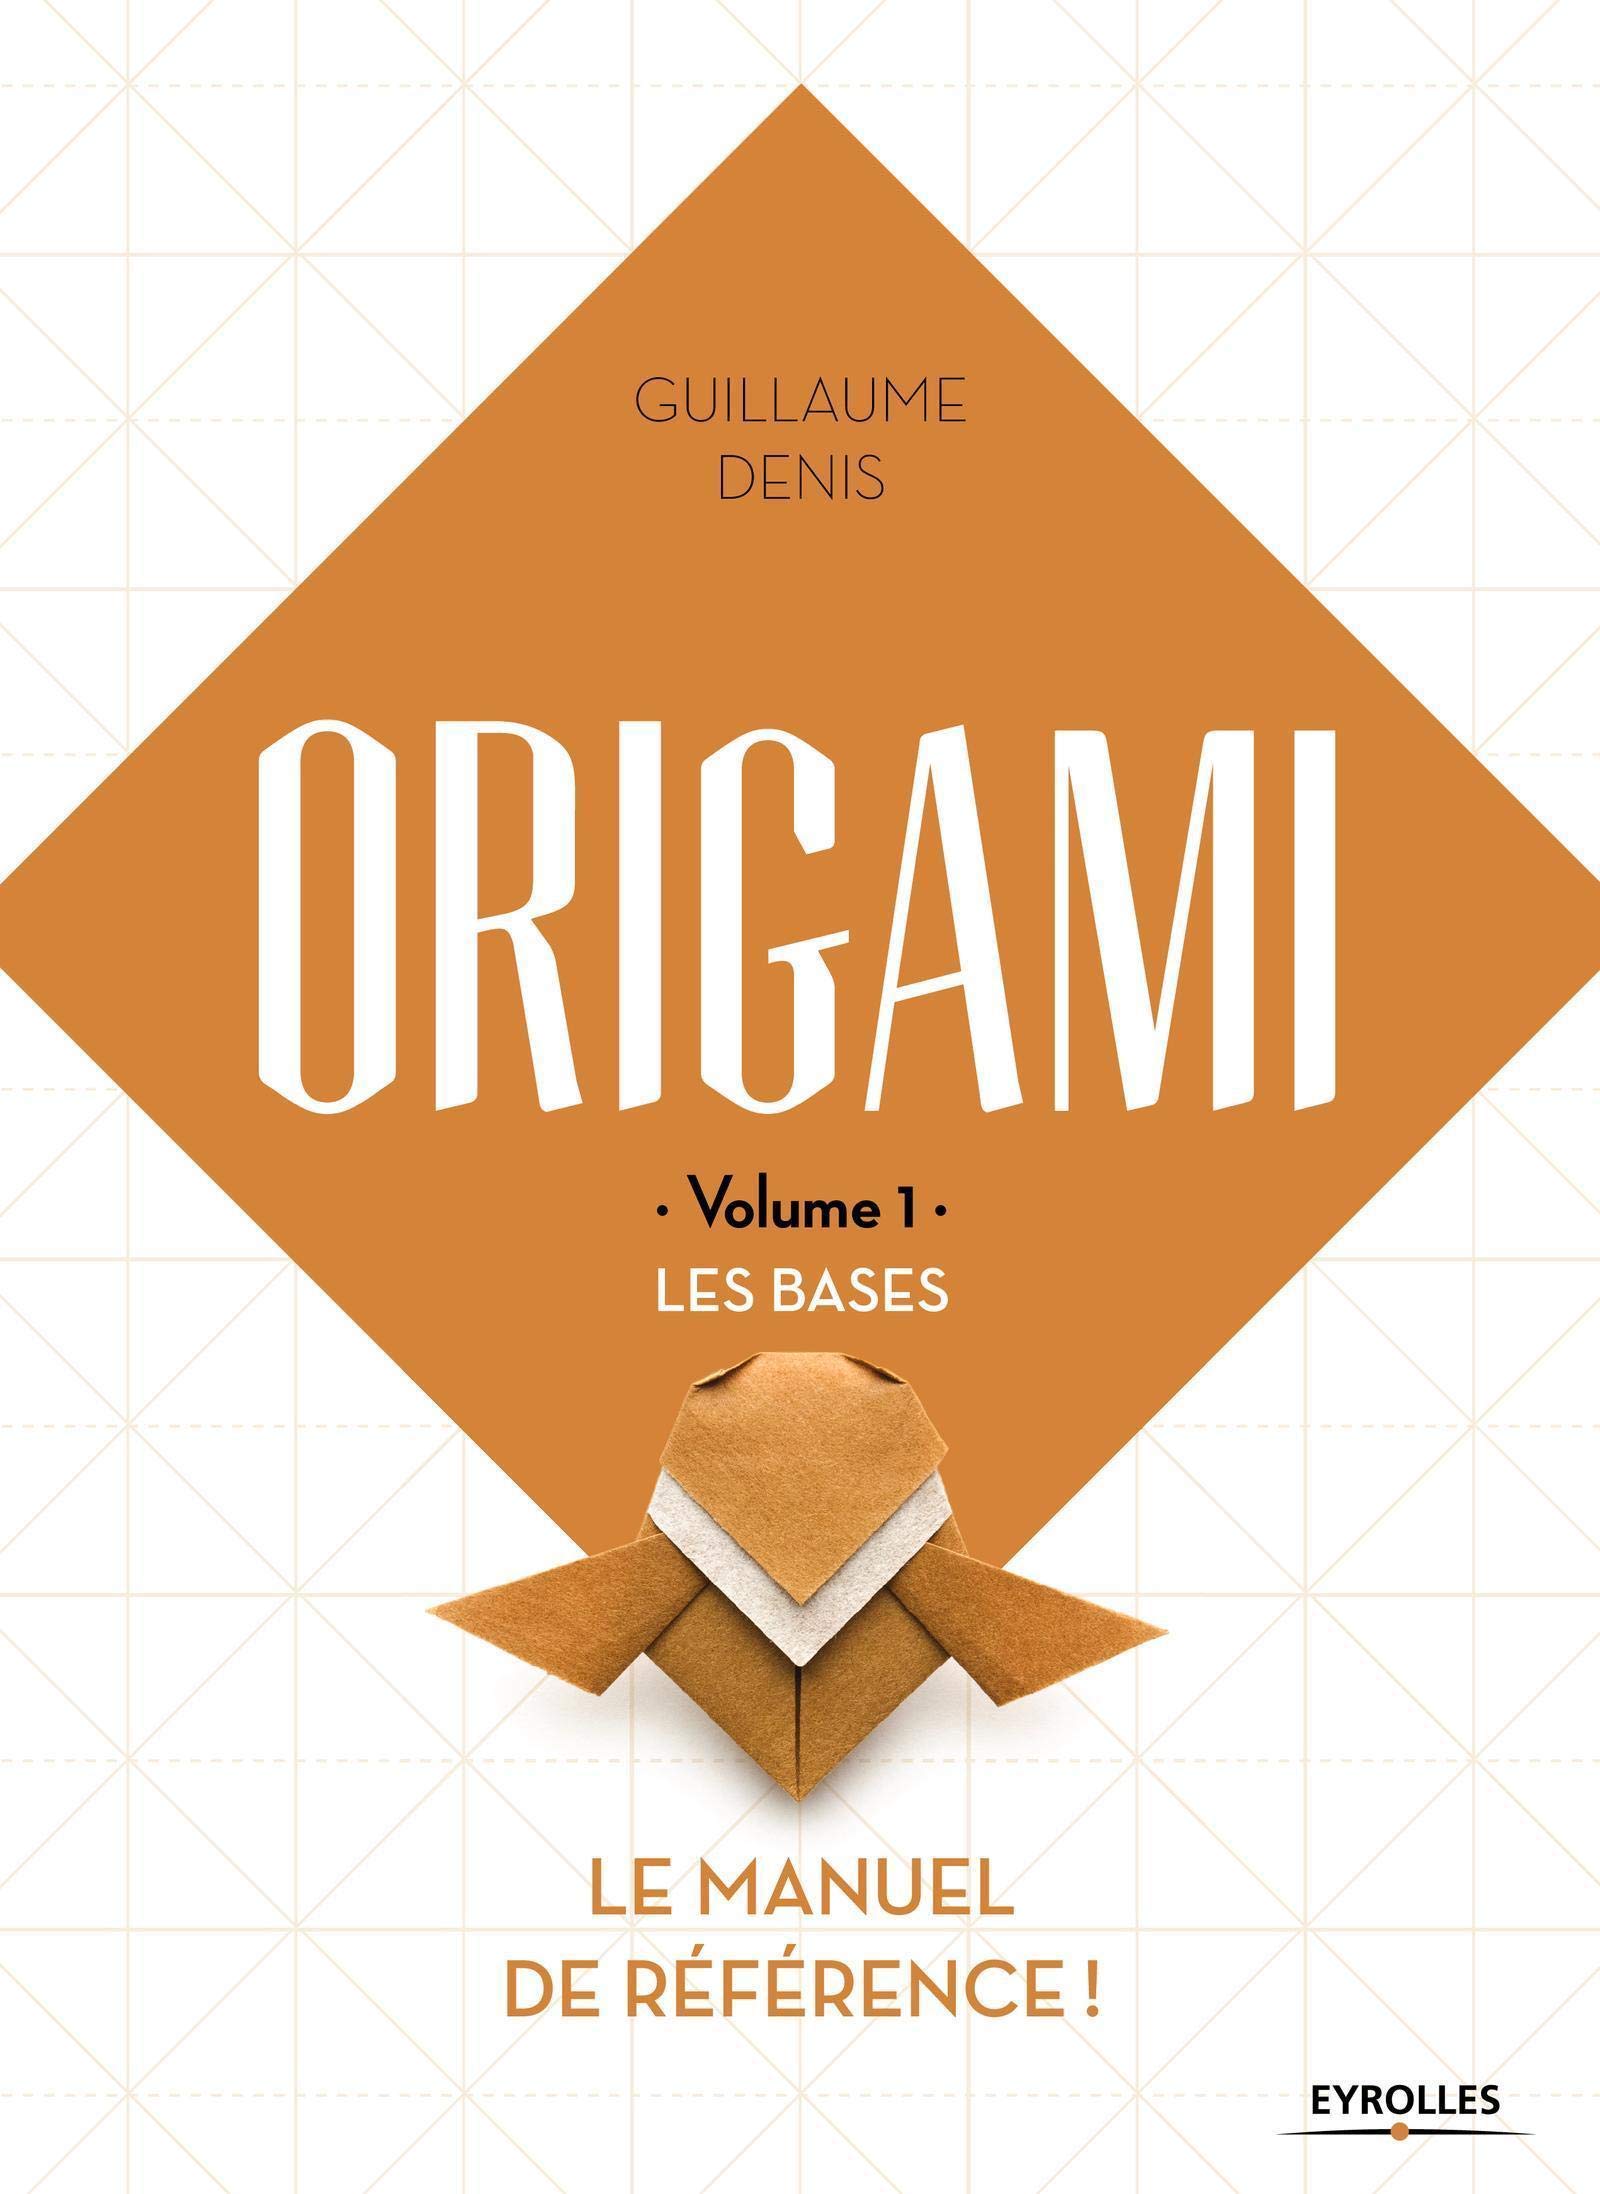 ORIGAMI - Volume 1 - LES BASES : page 212.